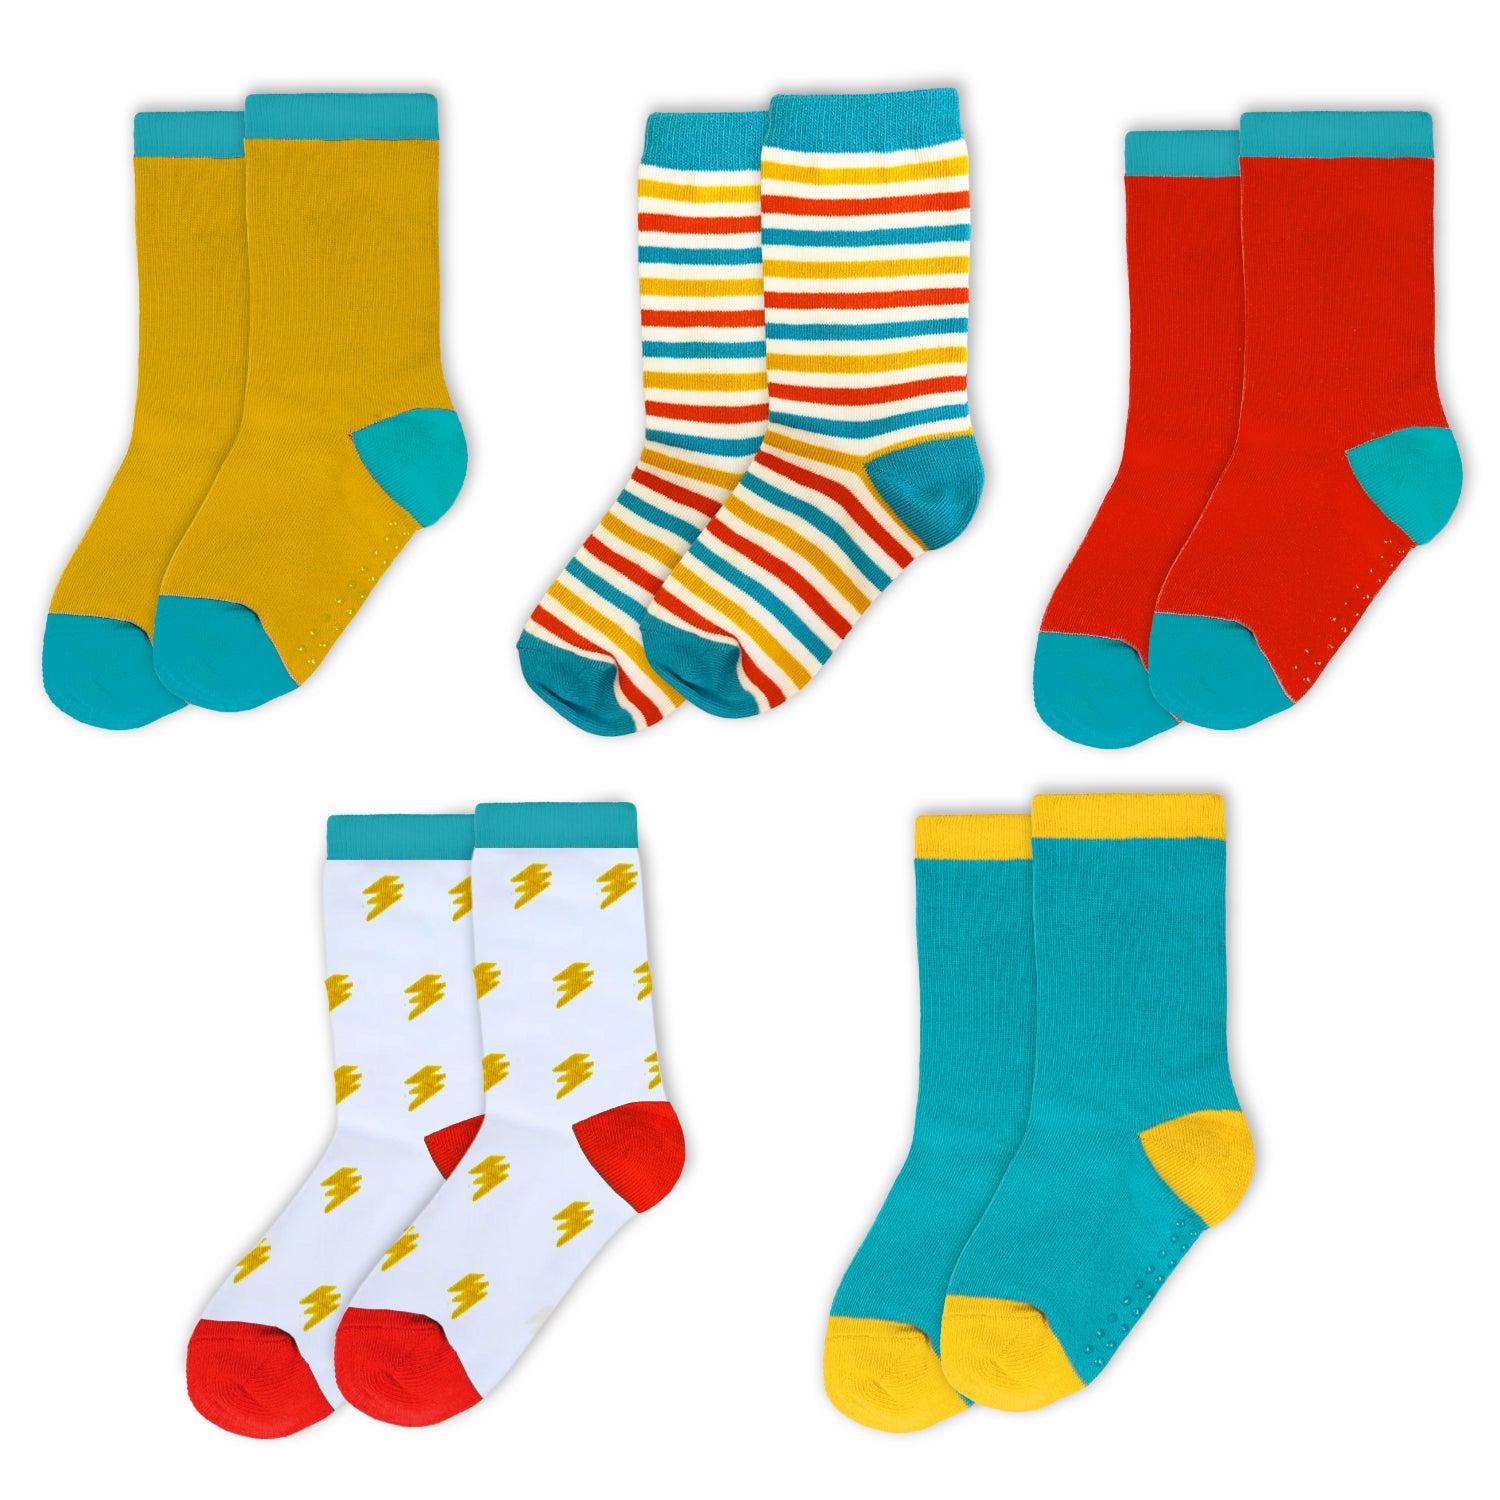 Girl's Non-Slip Socks in Eco-friendly Certified Cotton (3 pairs)